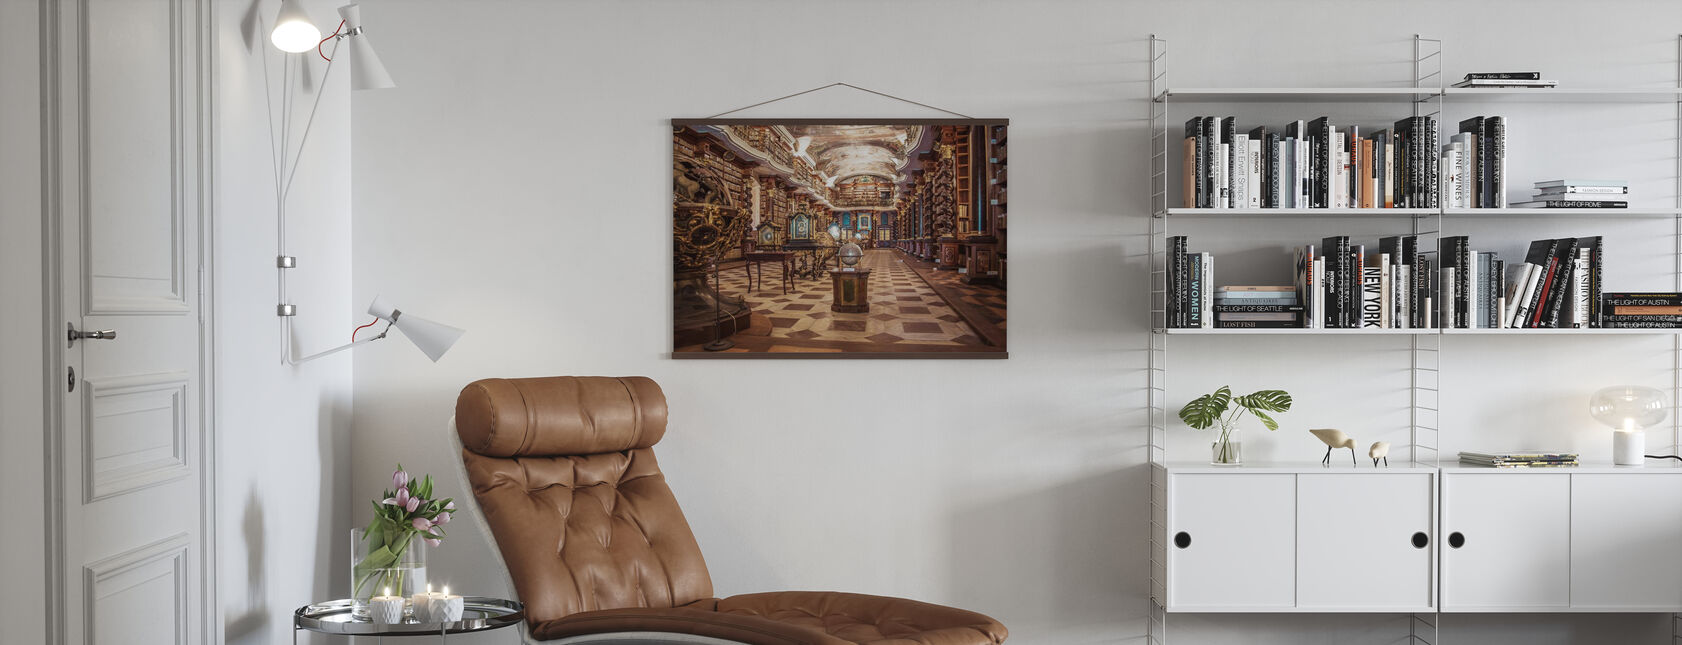 Library of Science - Poster - Living Room